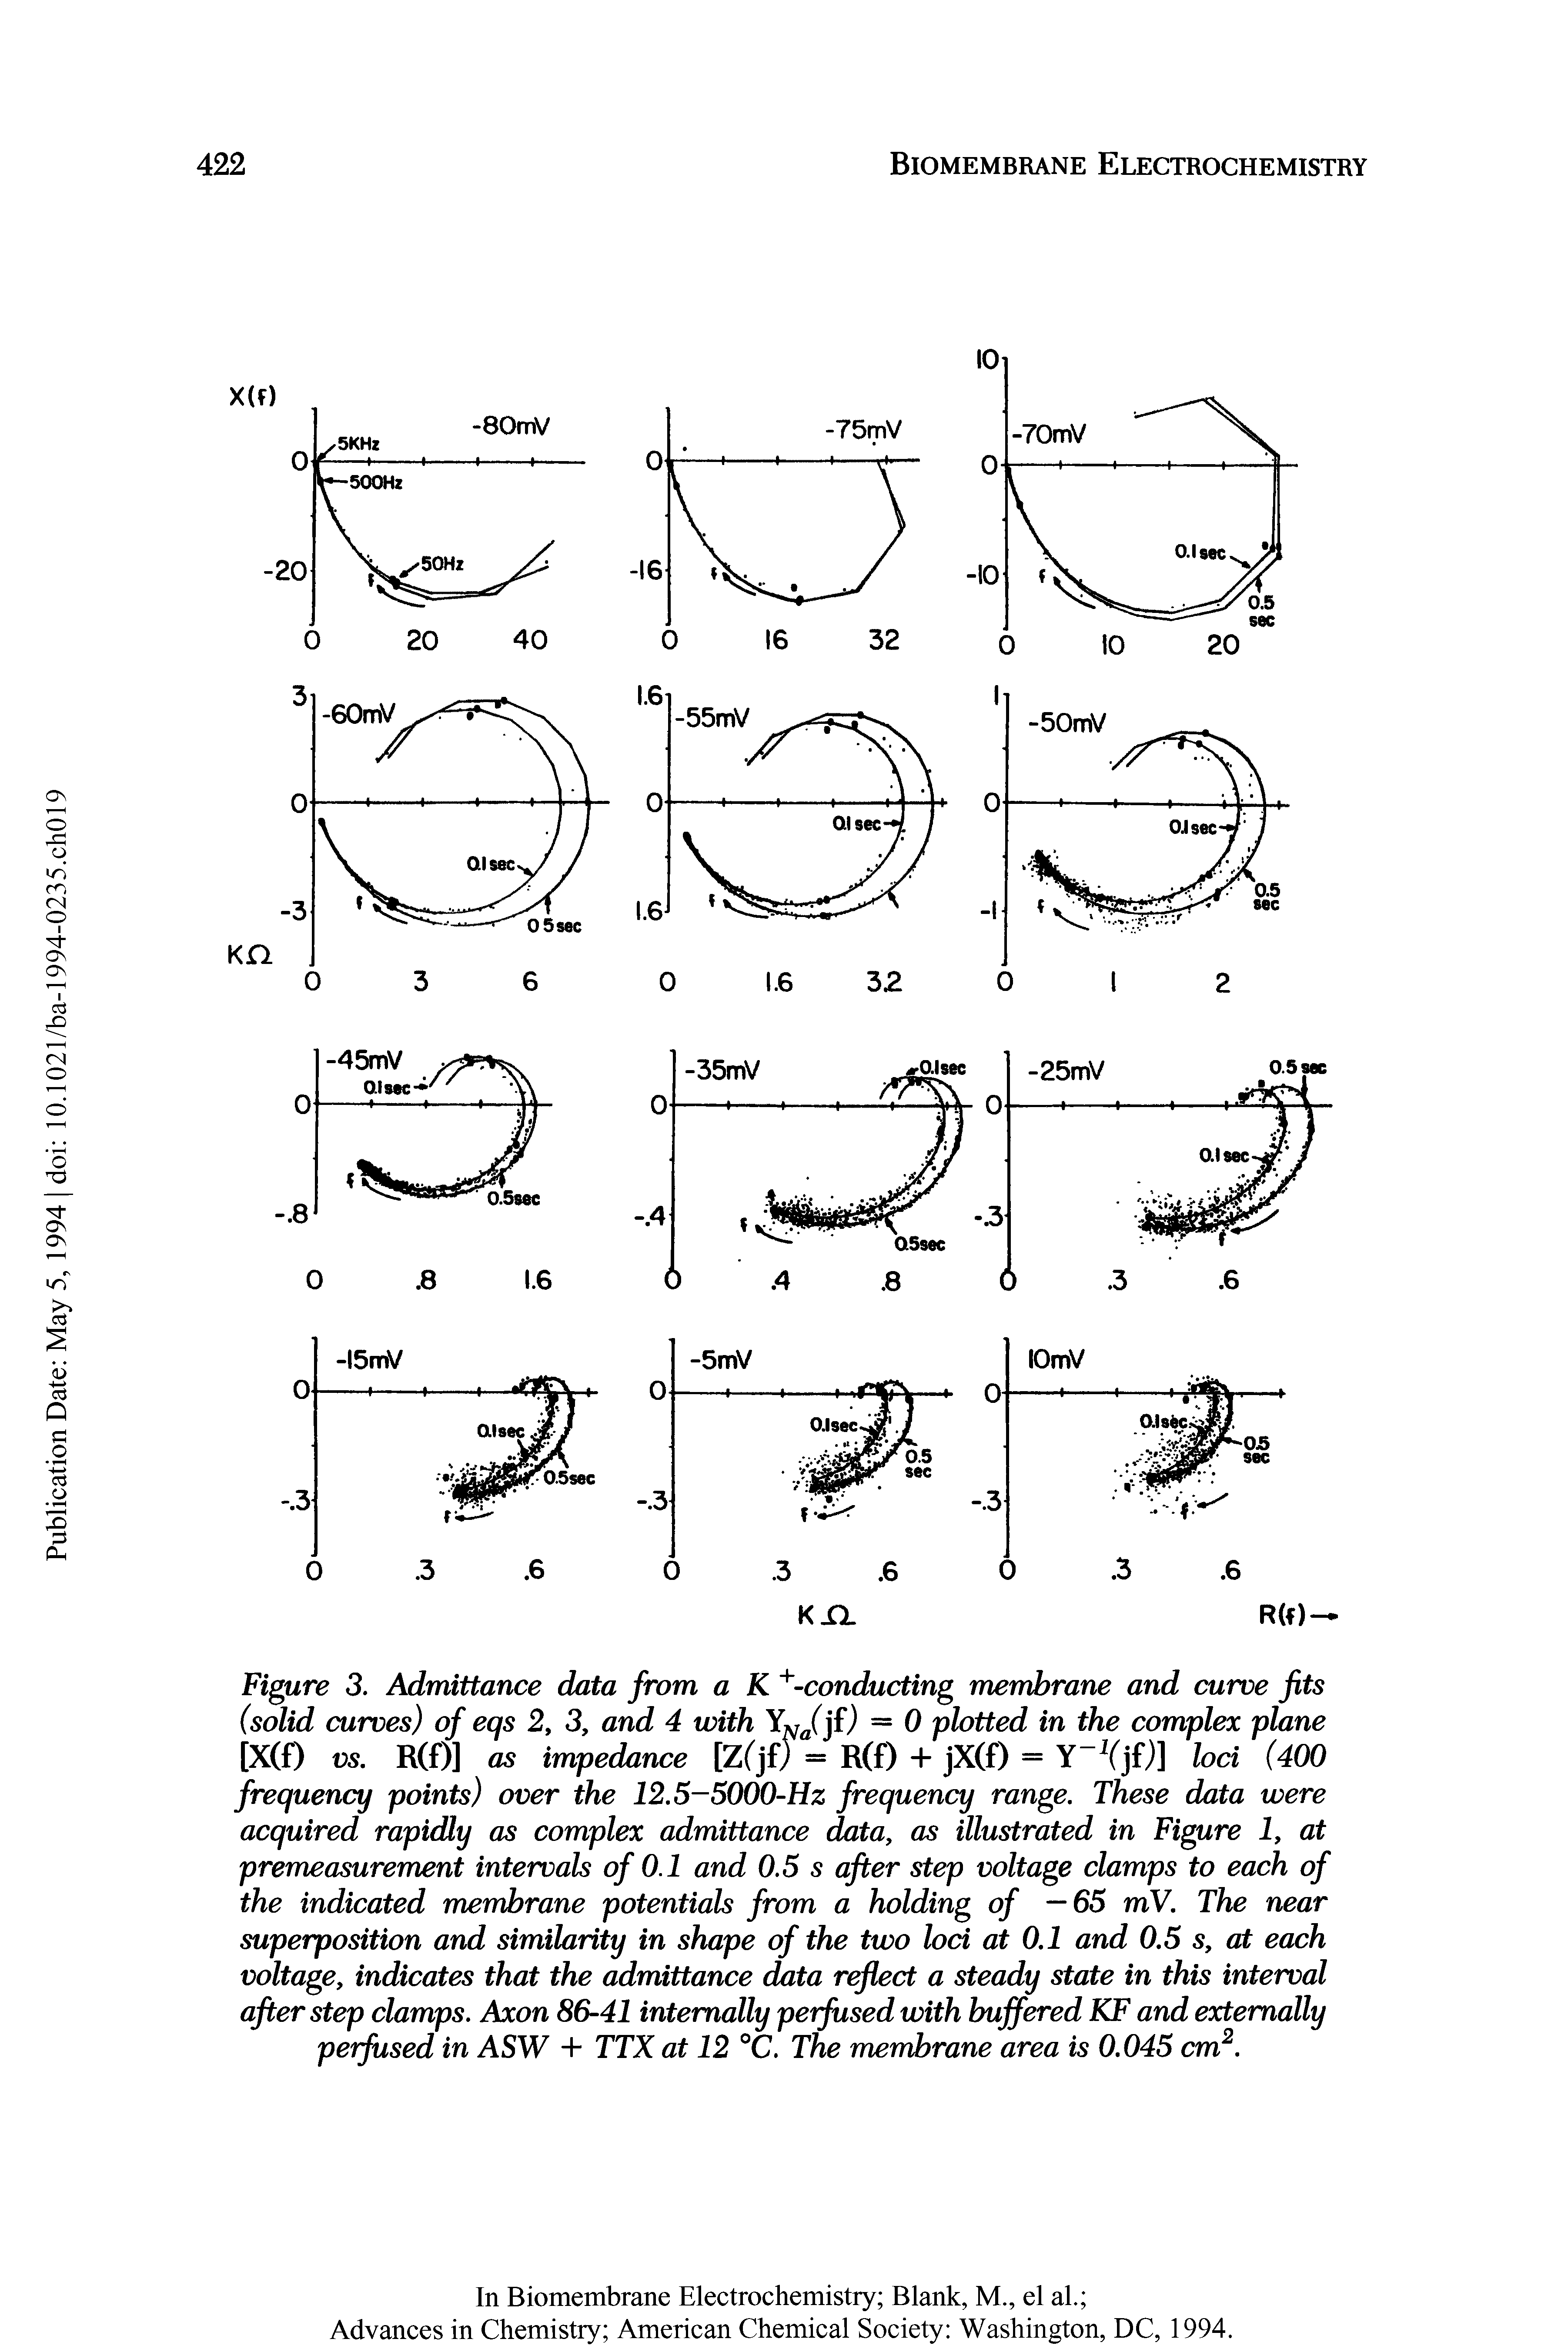 Figure 3. Admittance data from a K +-conducting membrane and curve fits (solid curves) of eqs 2, 3, and 4 with Y /jf,) = 0 plotted in the complex plane [X(f) vs. R(f)] as impedance [Z(jf) = R(f) + jX(f) = Y 1(jf/)] loci (400 frequency points) over the 12.5 5000-Hz frequency range. These data were acquired rapidly as complex admittance data, as illustrated in Figure 1, at premeasurement intervals of 0.1 and 0.5 s after step voltage clamps to each of the indicated membrane potentials from a holding of —65 mV. The near superposition and similarity in shape of the two loci at 0.1 and 0.5 s, at each voltage, indicates that the admittance data reflect a steady state in this interval after step clamps. Axon 86-41 internally perfused with buffered KF and externally perfused in ASW + TTX at 12 °C. The membrane area is 0.045 cm2.